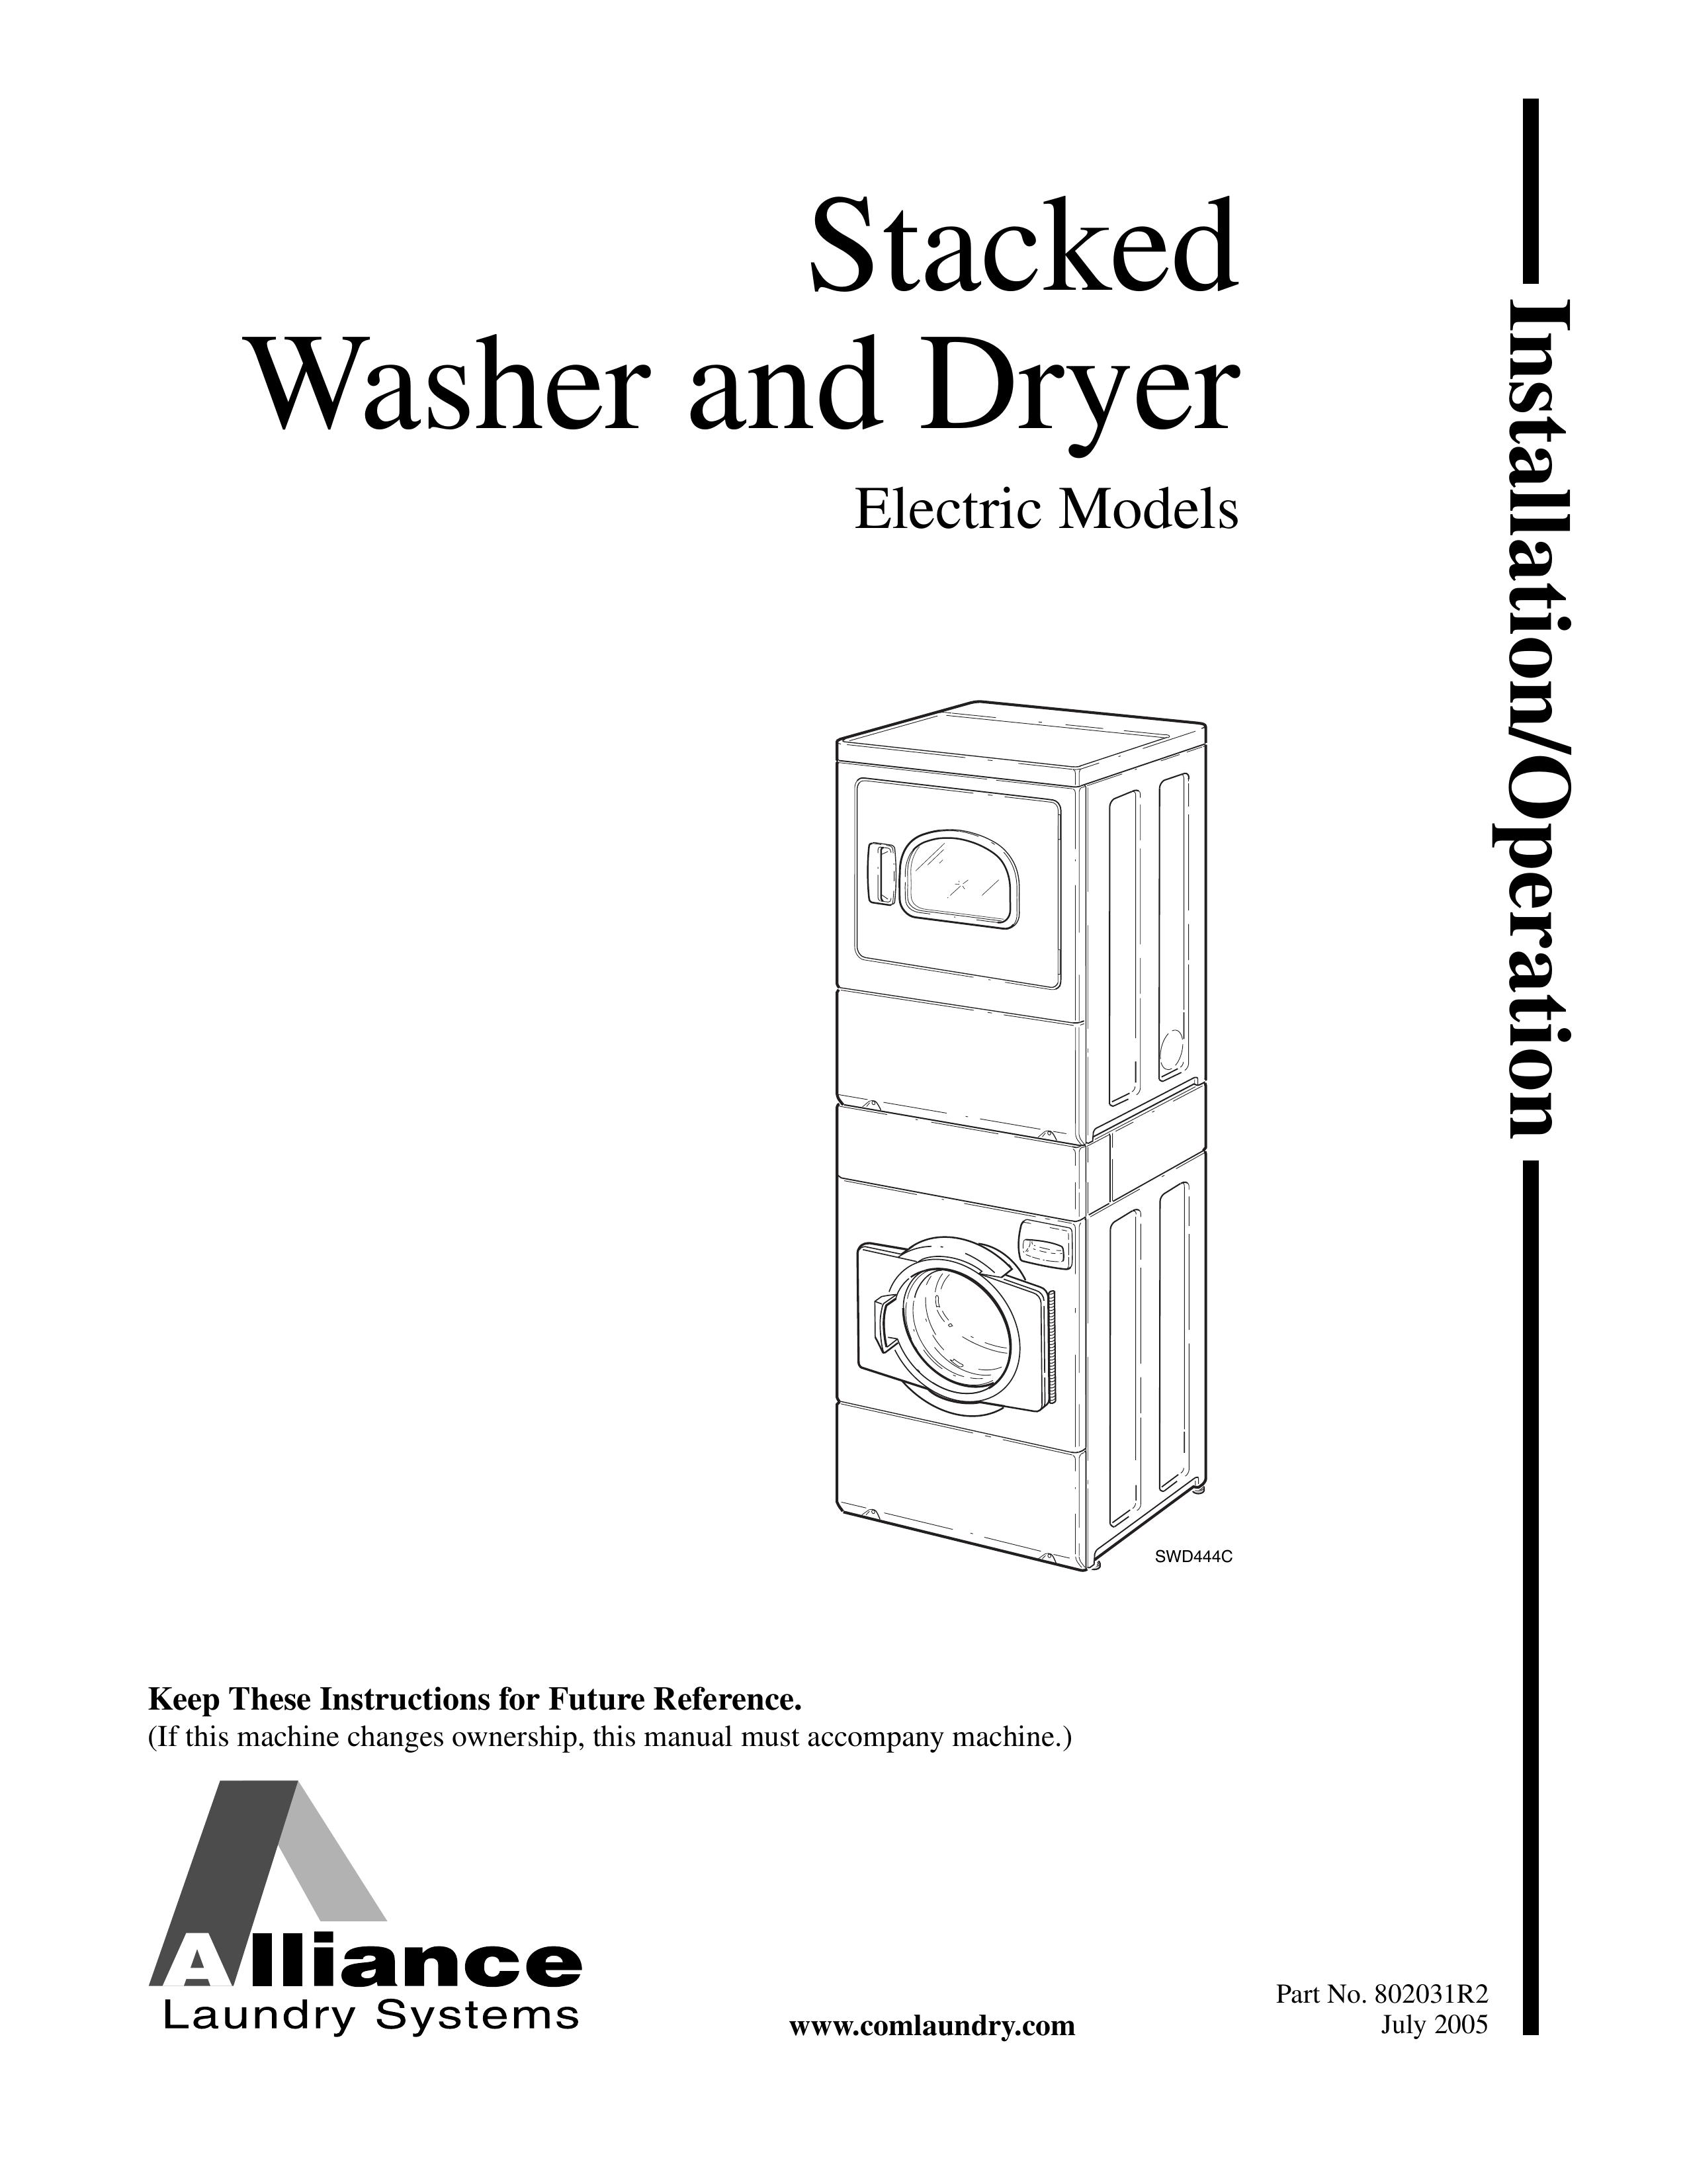 Alliance Laundry Systems SWD444C Washer/Dryer User Manual